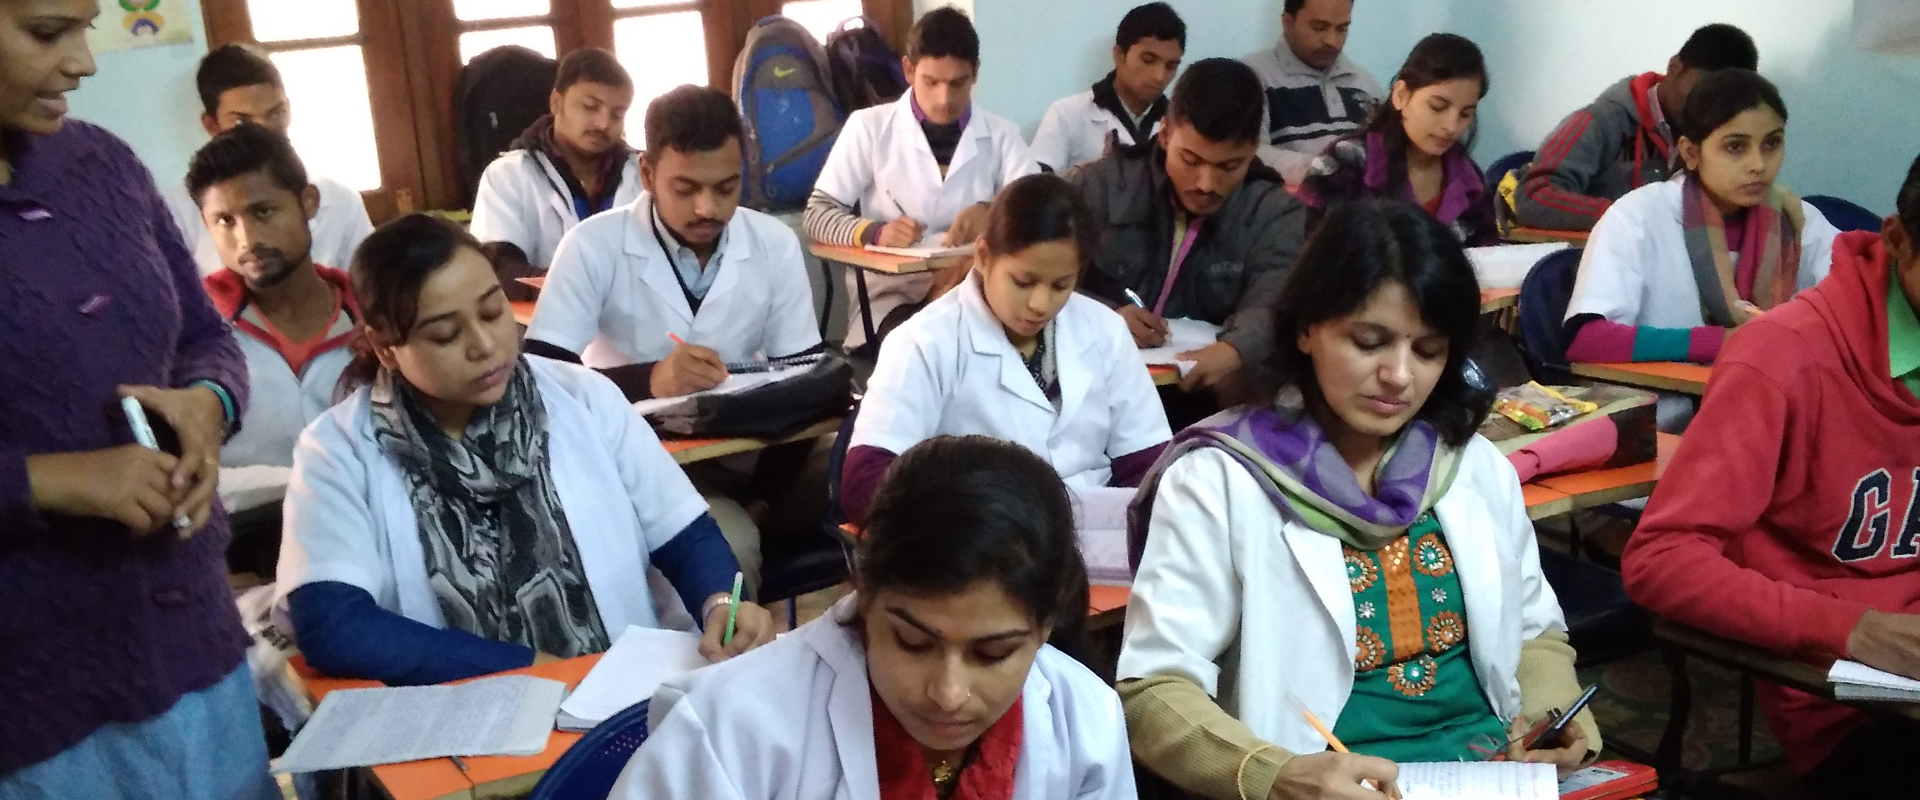 become a paramedic in patna, 
how to become a paramedic in patna,
lab technician in patna, 
best lab technicians in patna